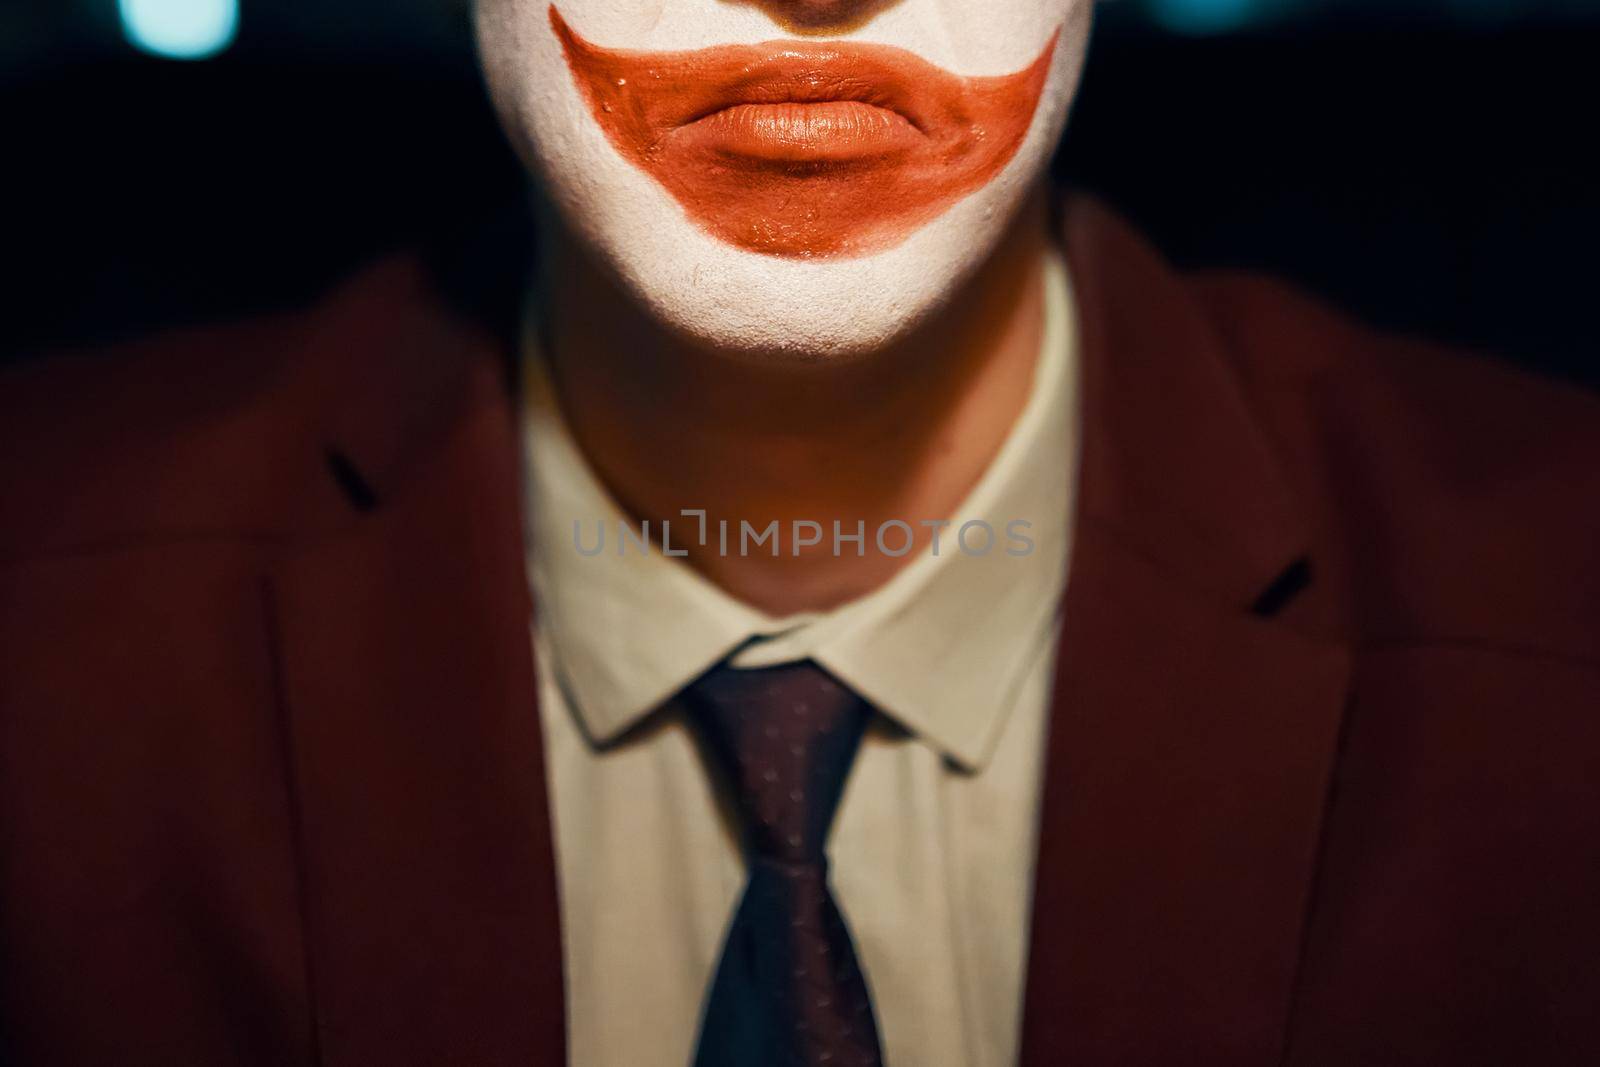 Close-up of a guy's mouth with joker makeup. Man in a suit and tie. Halloween party.